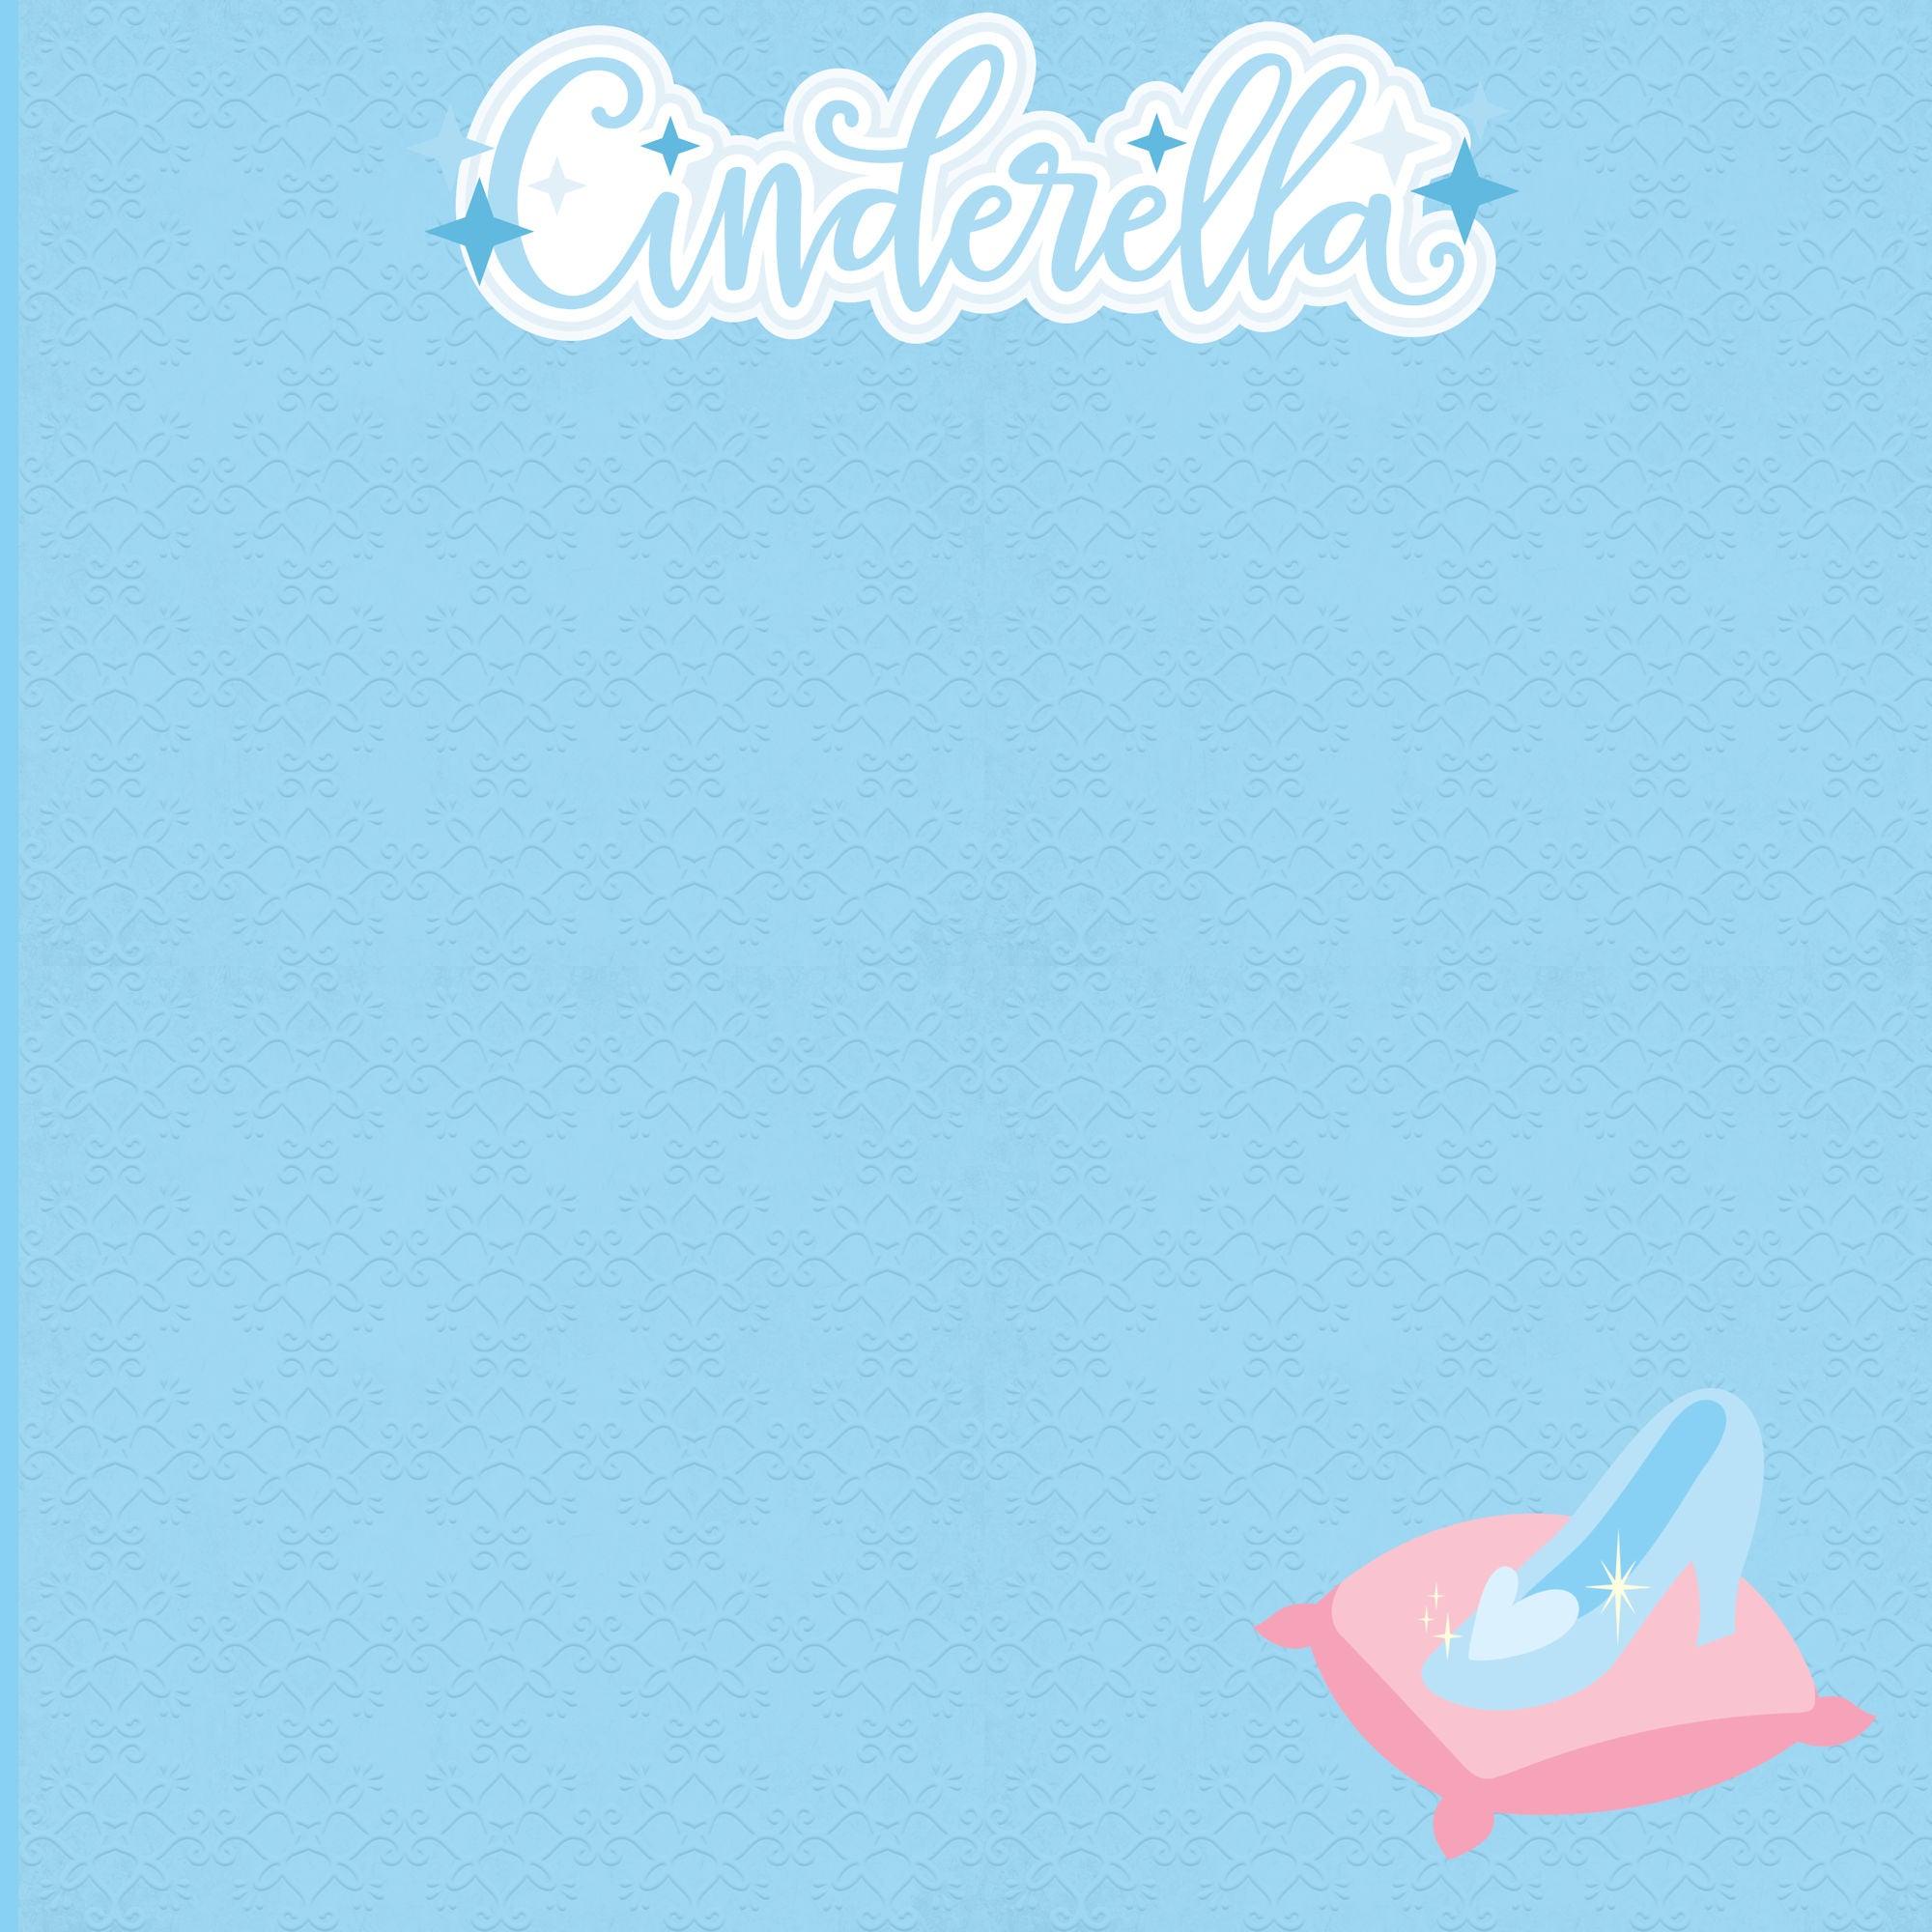 Cinderella Collection Cinderella 12 x 12 Double-Sided Scrapbook Paper by SSC Designs